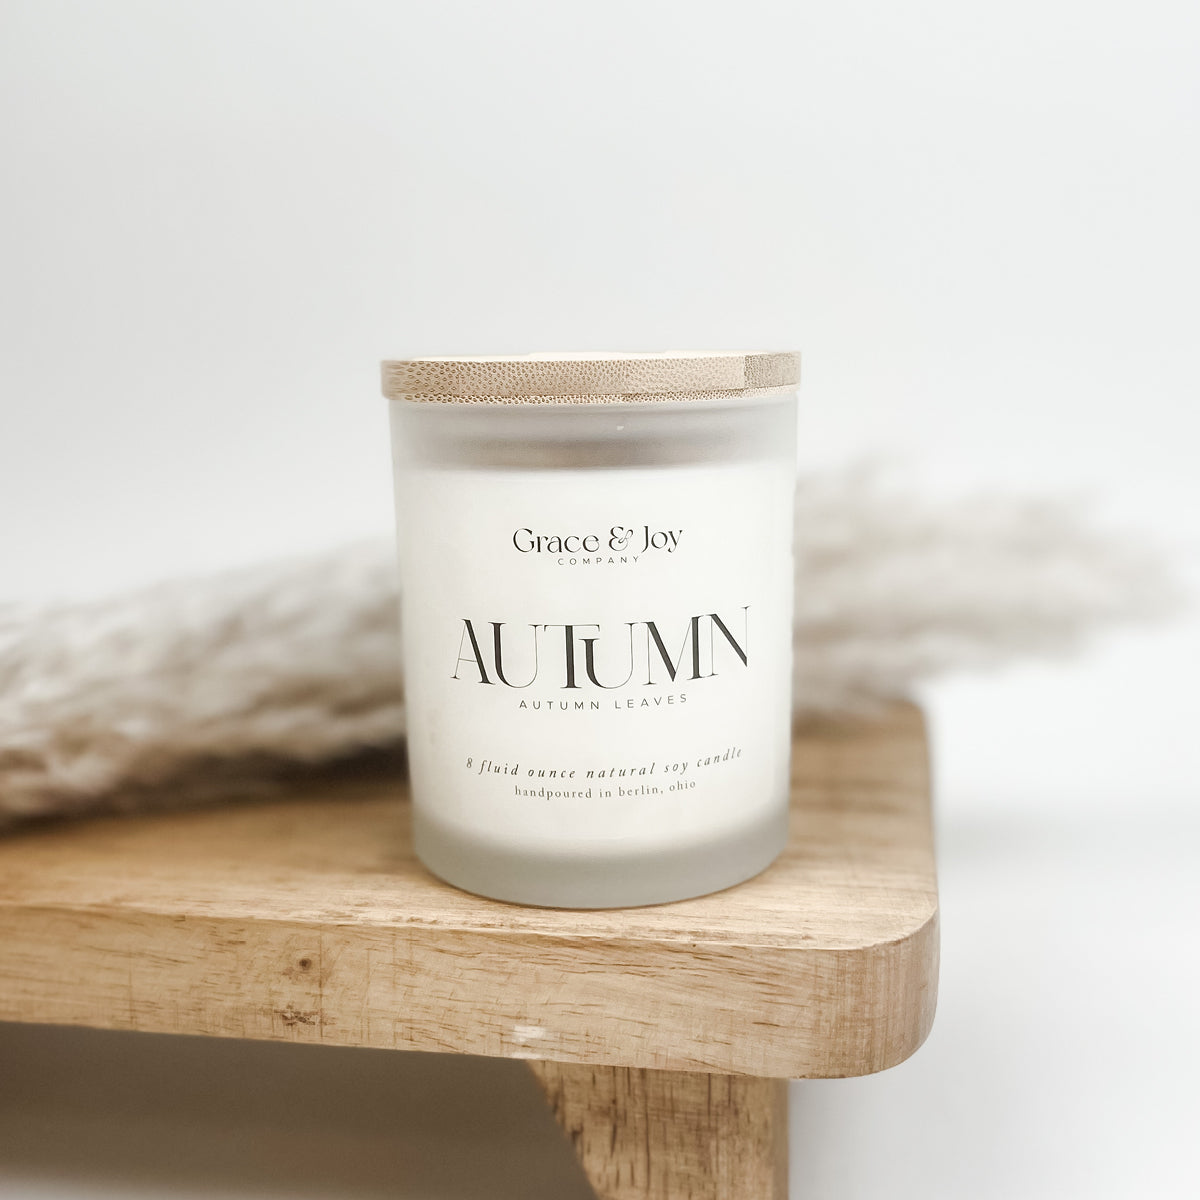 Autumn Leaves Candle